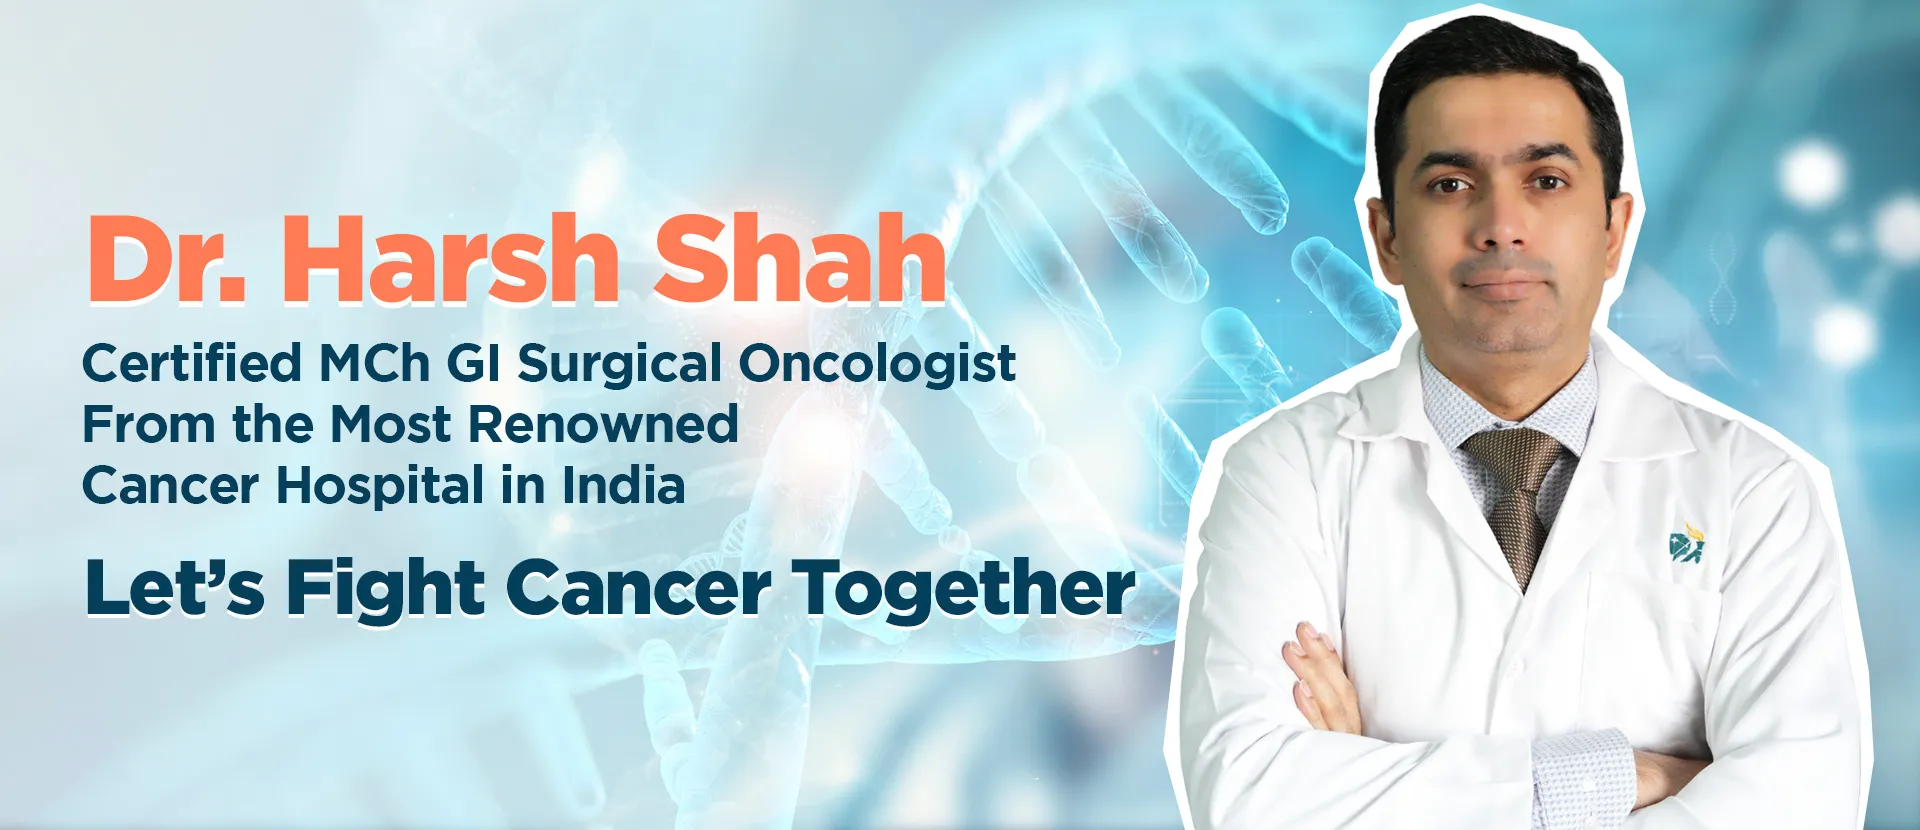 Dr Harsh Shah - The best Robotic Cancer Surgeon and Cancer Specialist in Ahmedabad, Gujarat, India